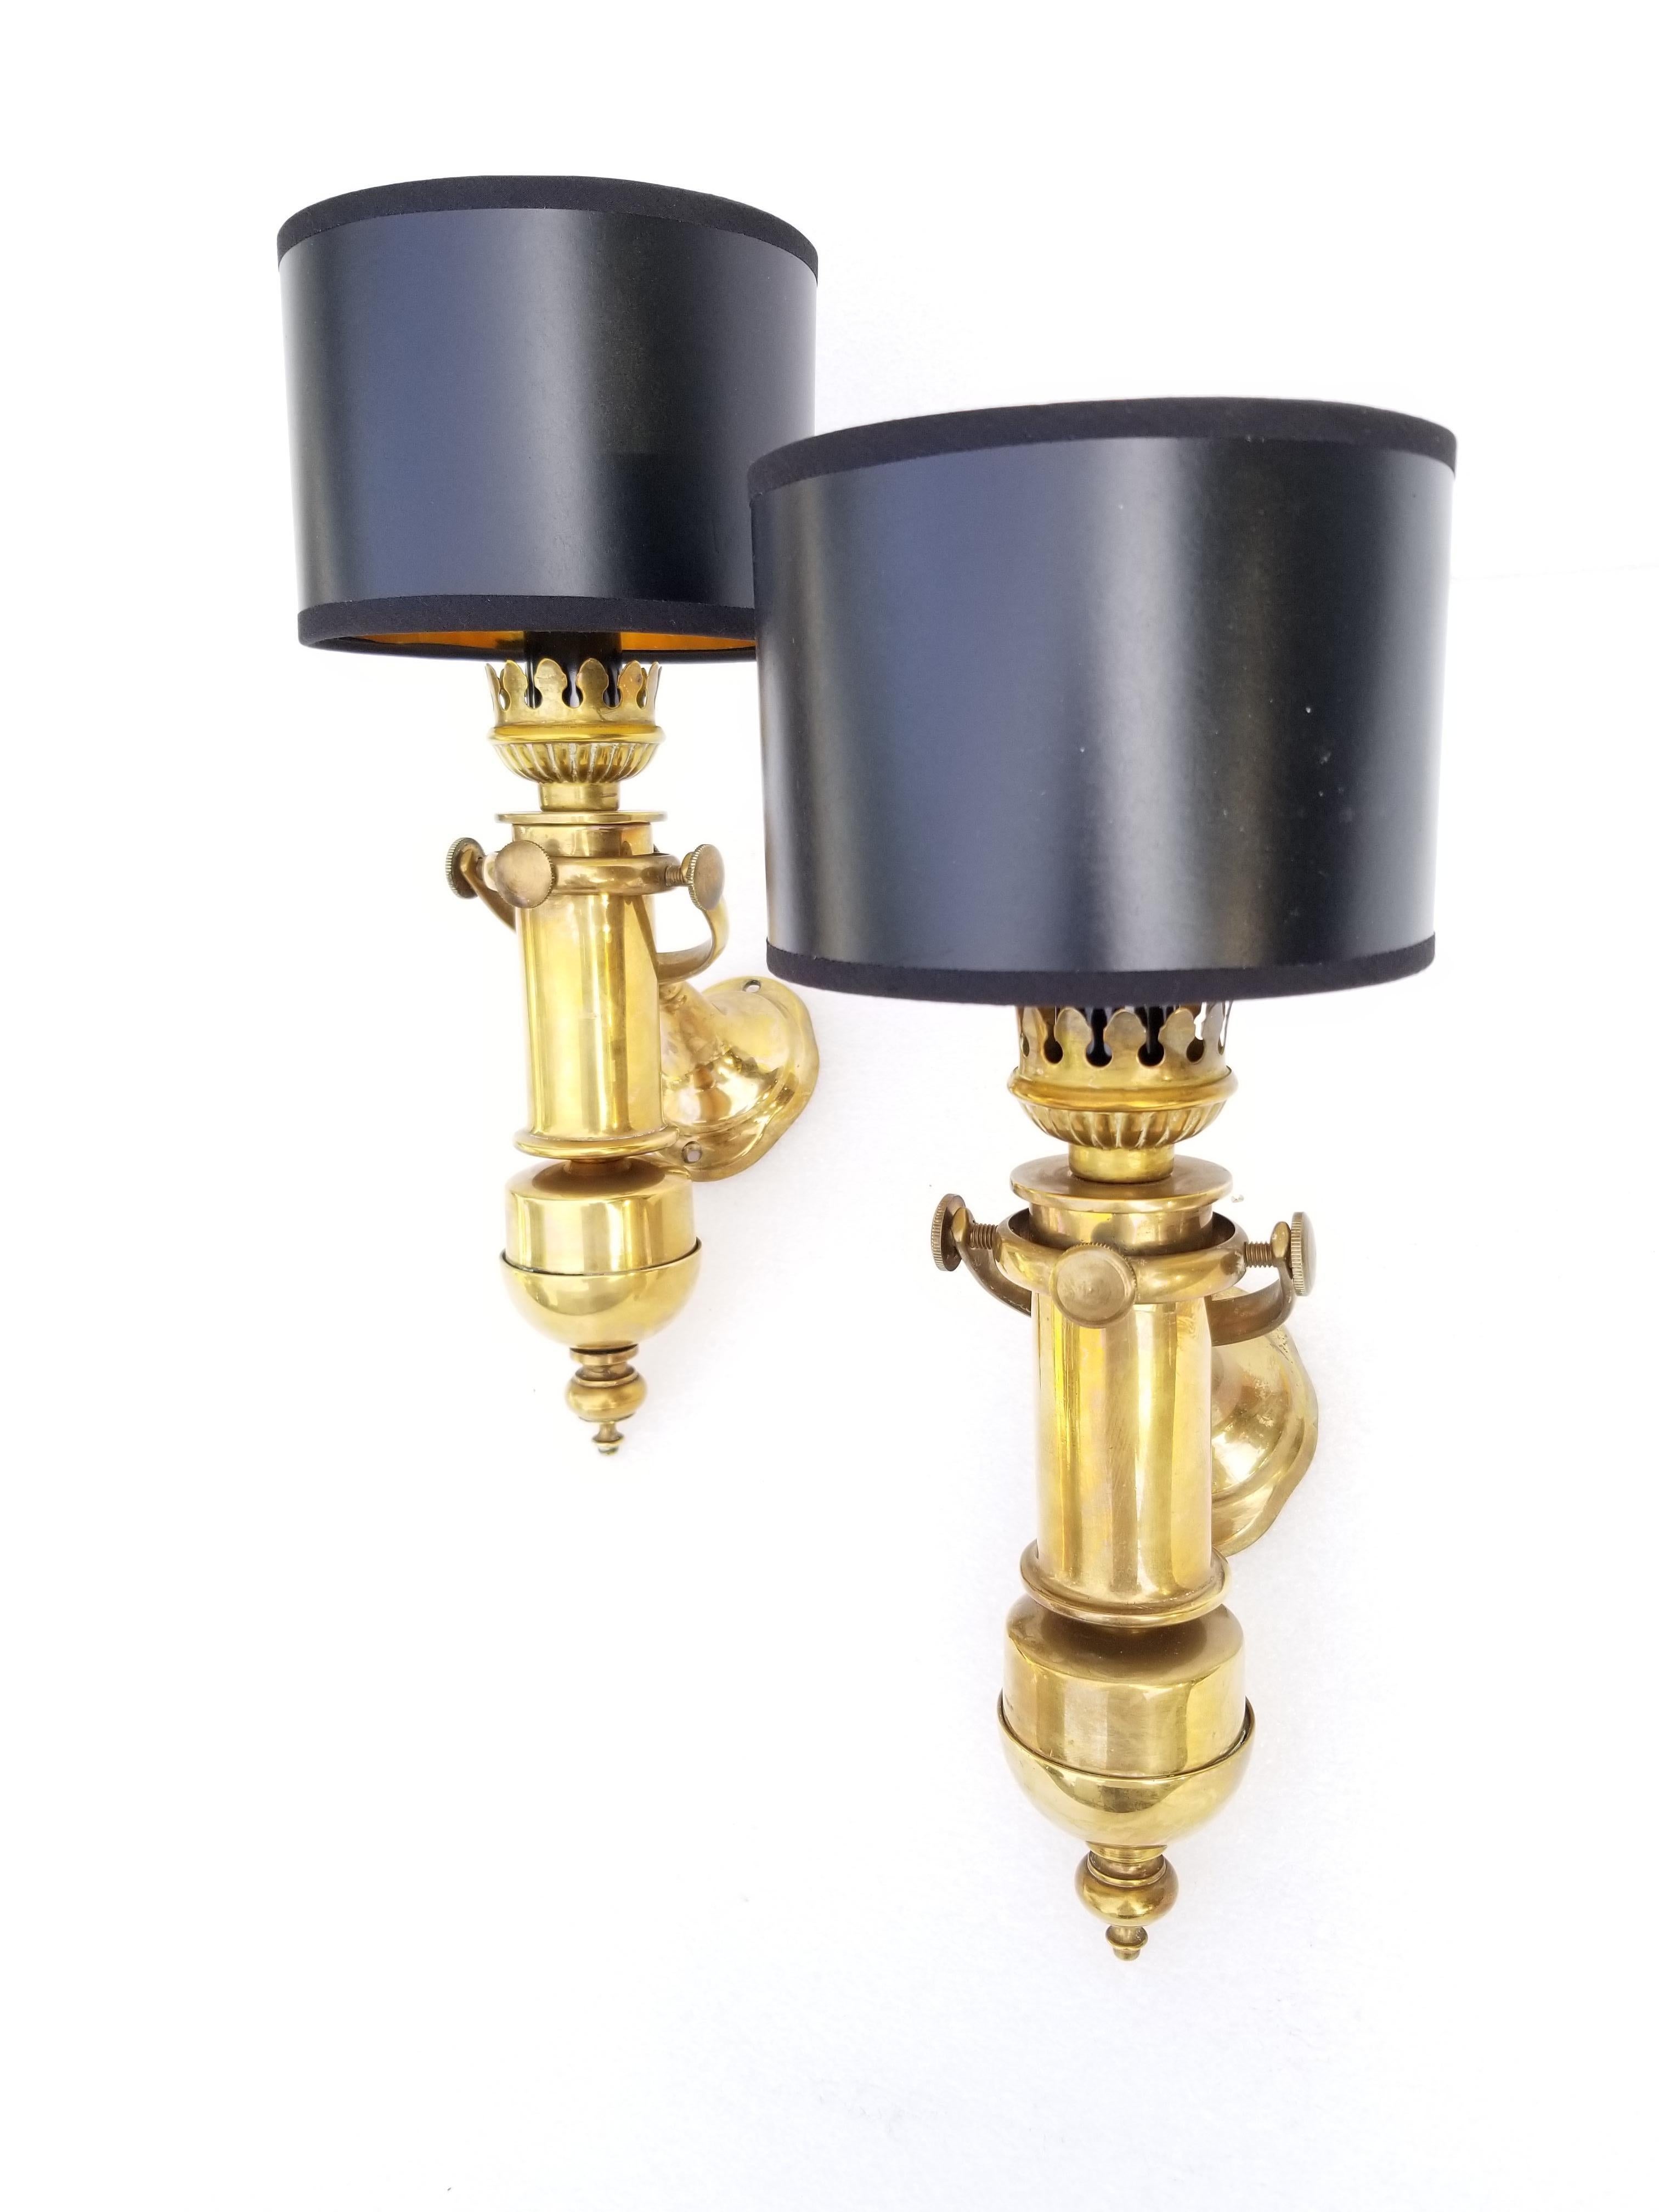 Pair of Nautical bronze sconces, 3 pairs available, from a st Tropez remodeled Yacht.
1 light, 60 watt max bulb
US rewired.
 